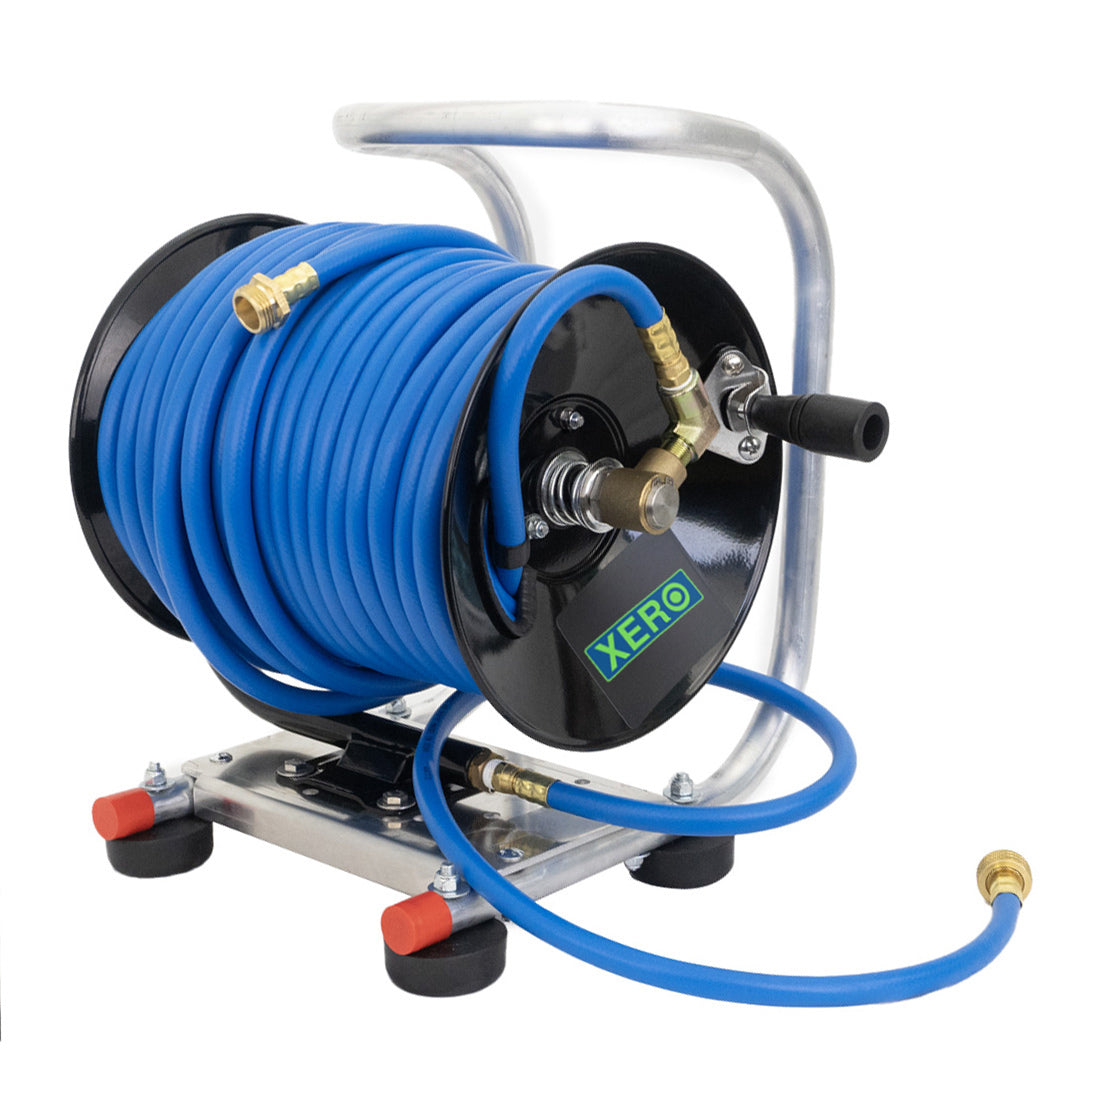 XERO Portable Hose Reel Assembly, Accessories